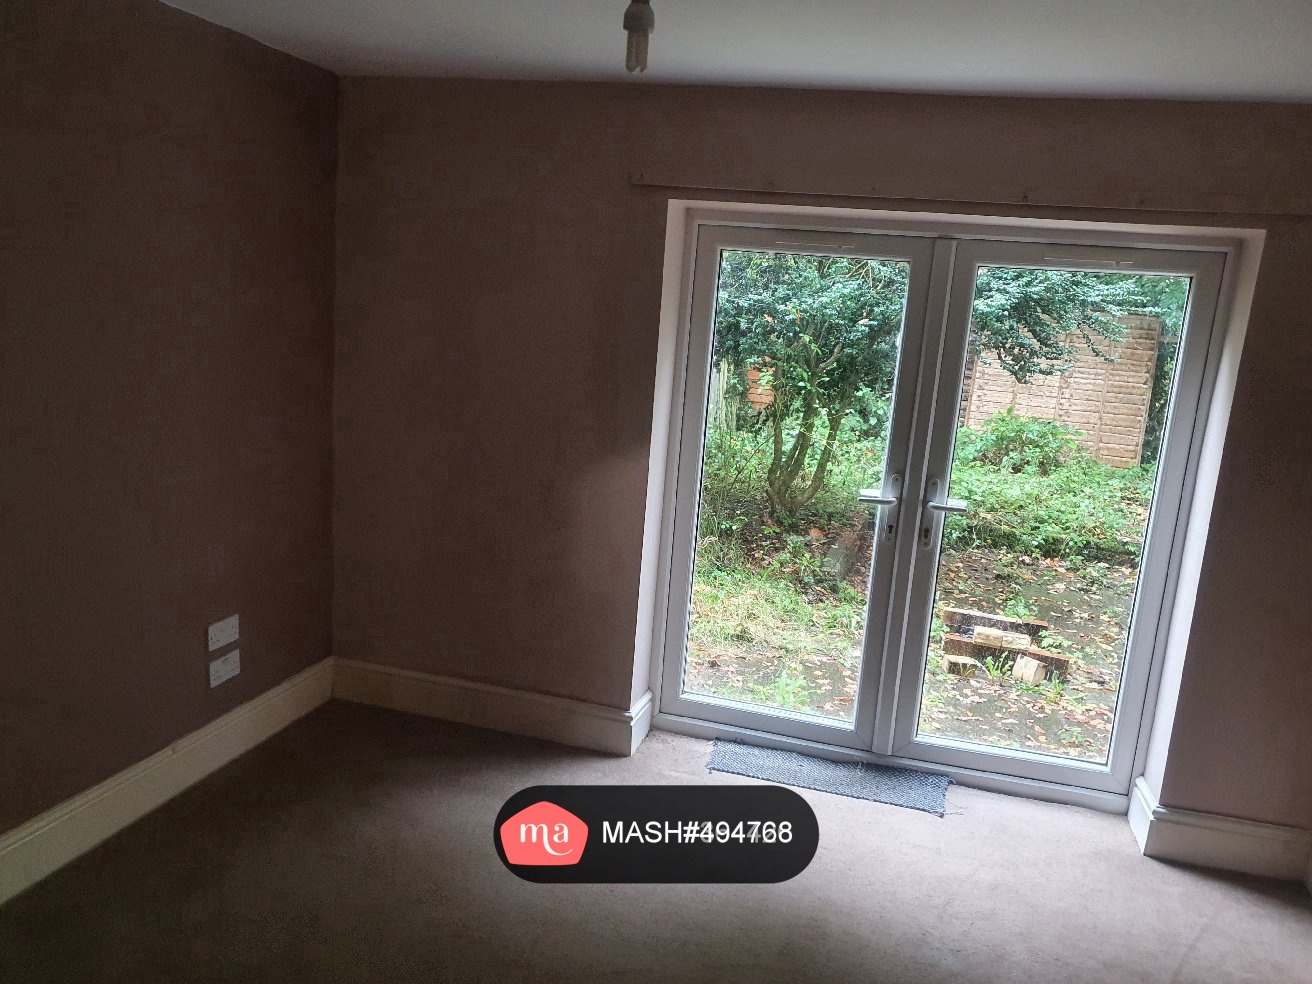 1 Bedroom Flat to rent in Wirral - Mashroom